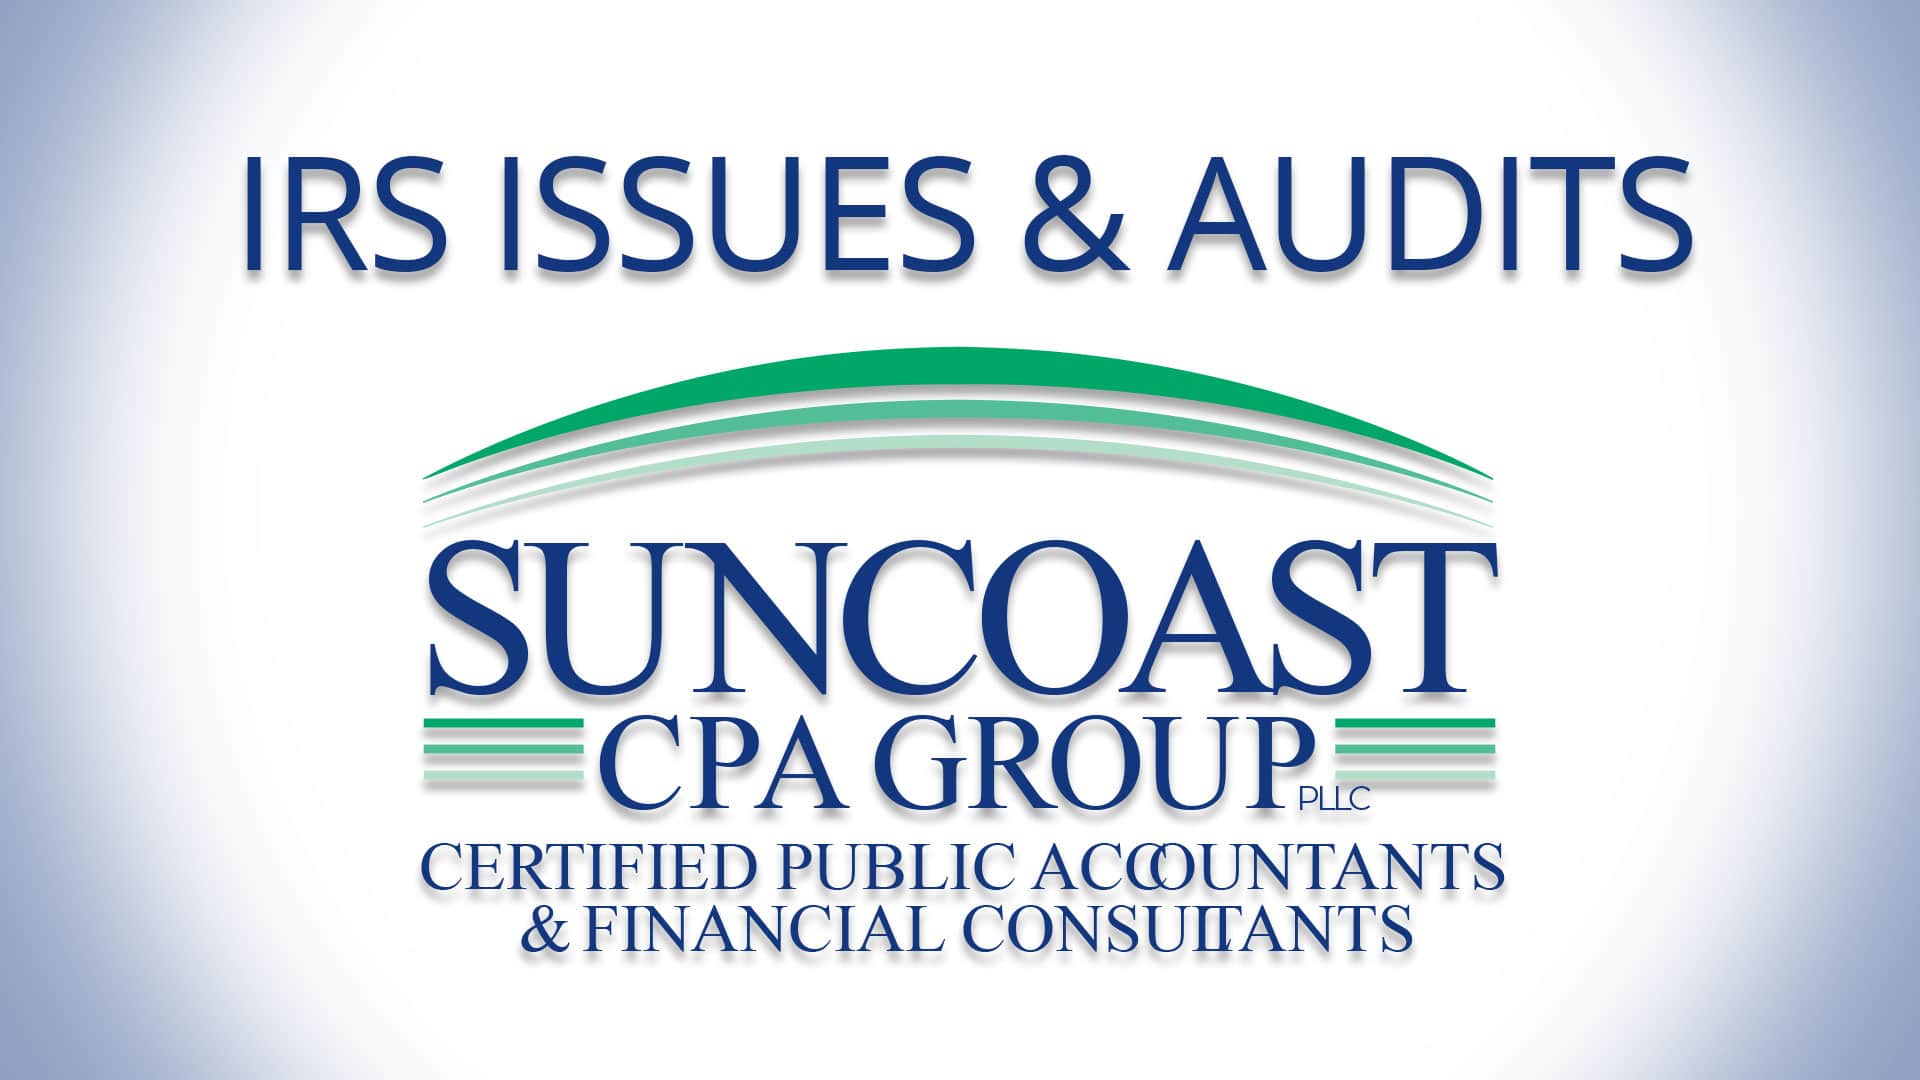 irs issues & audits